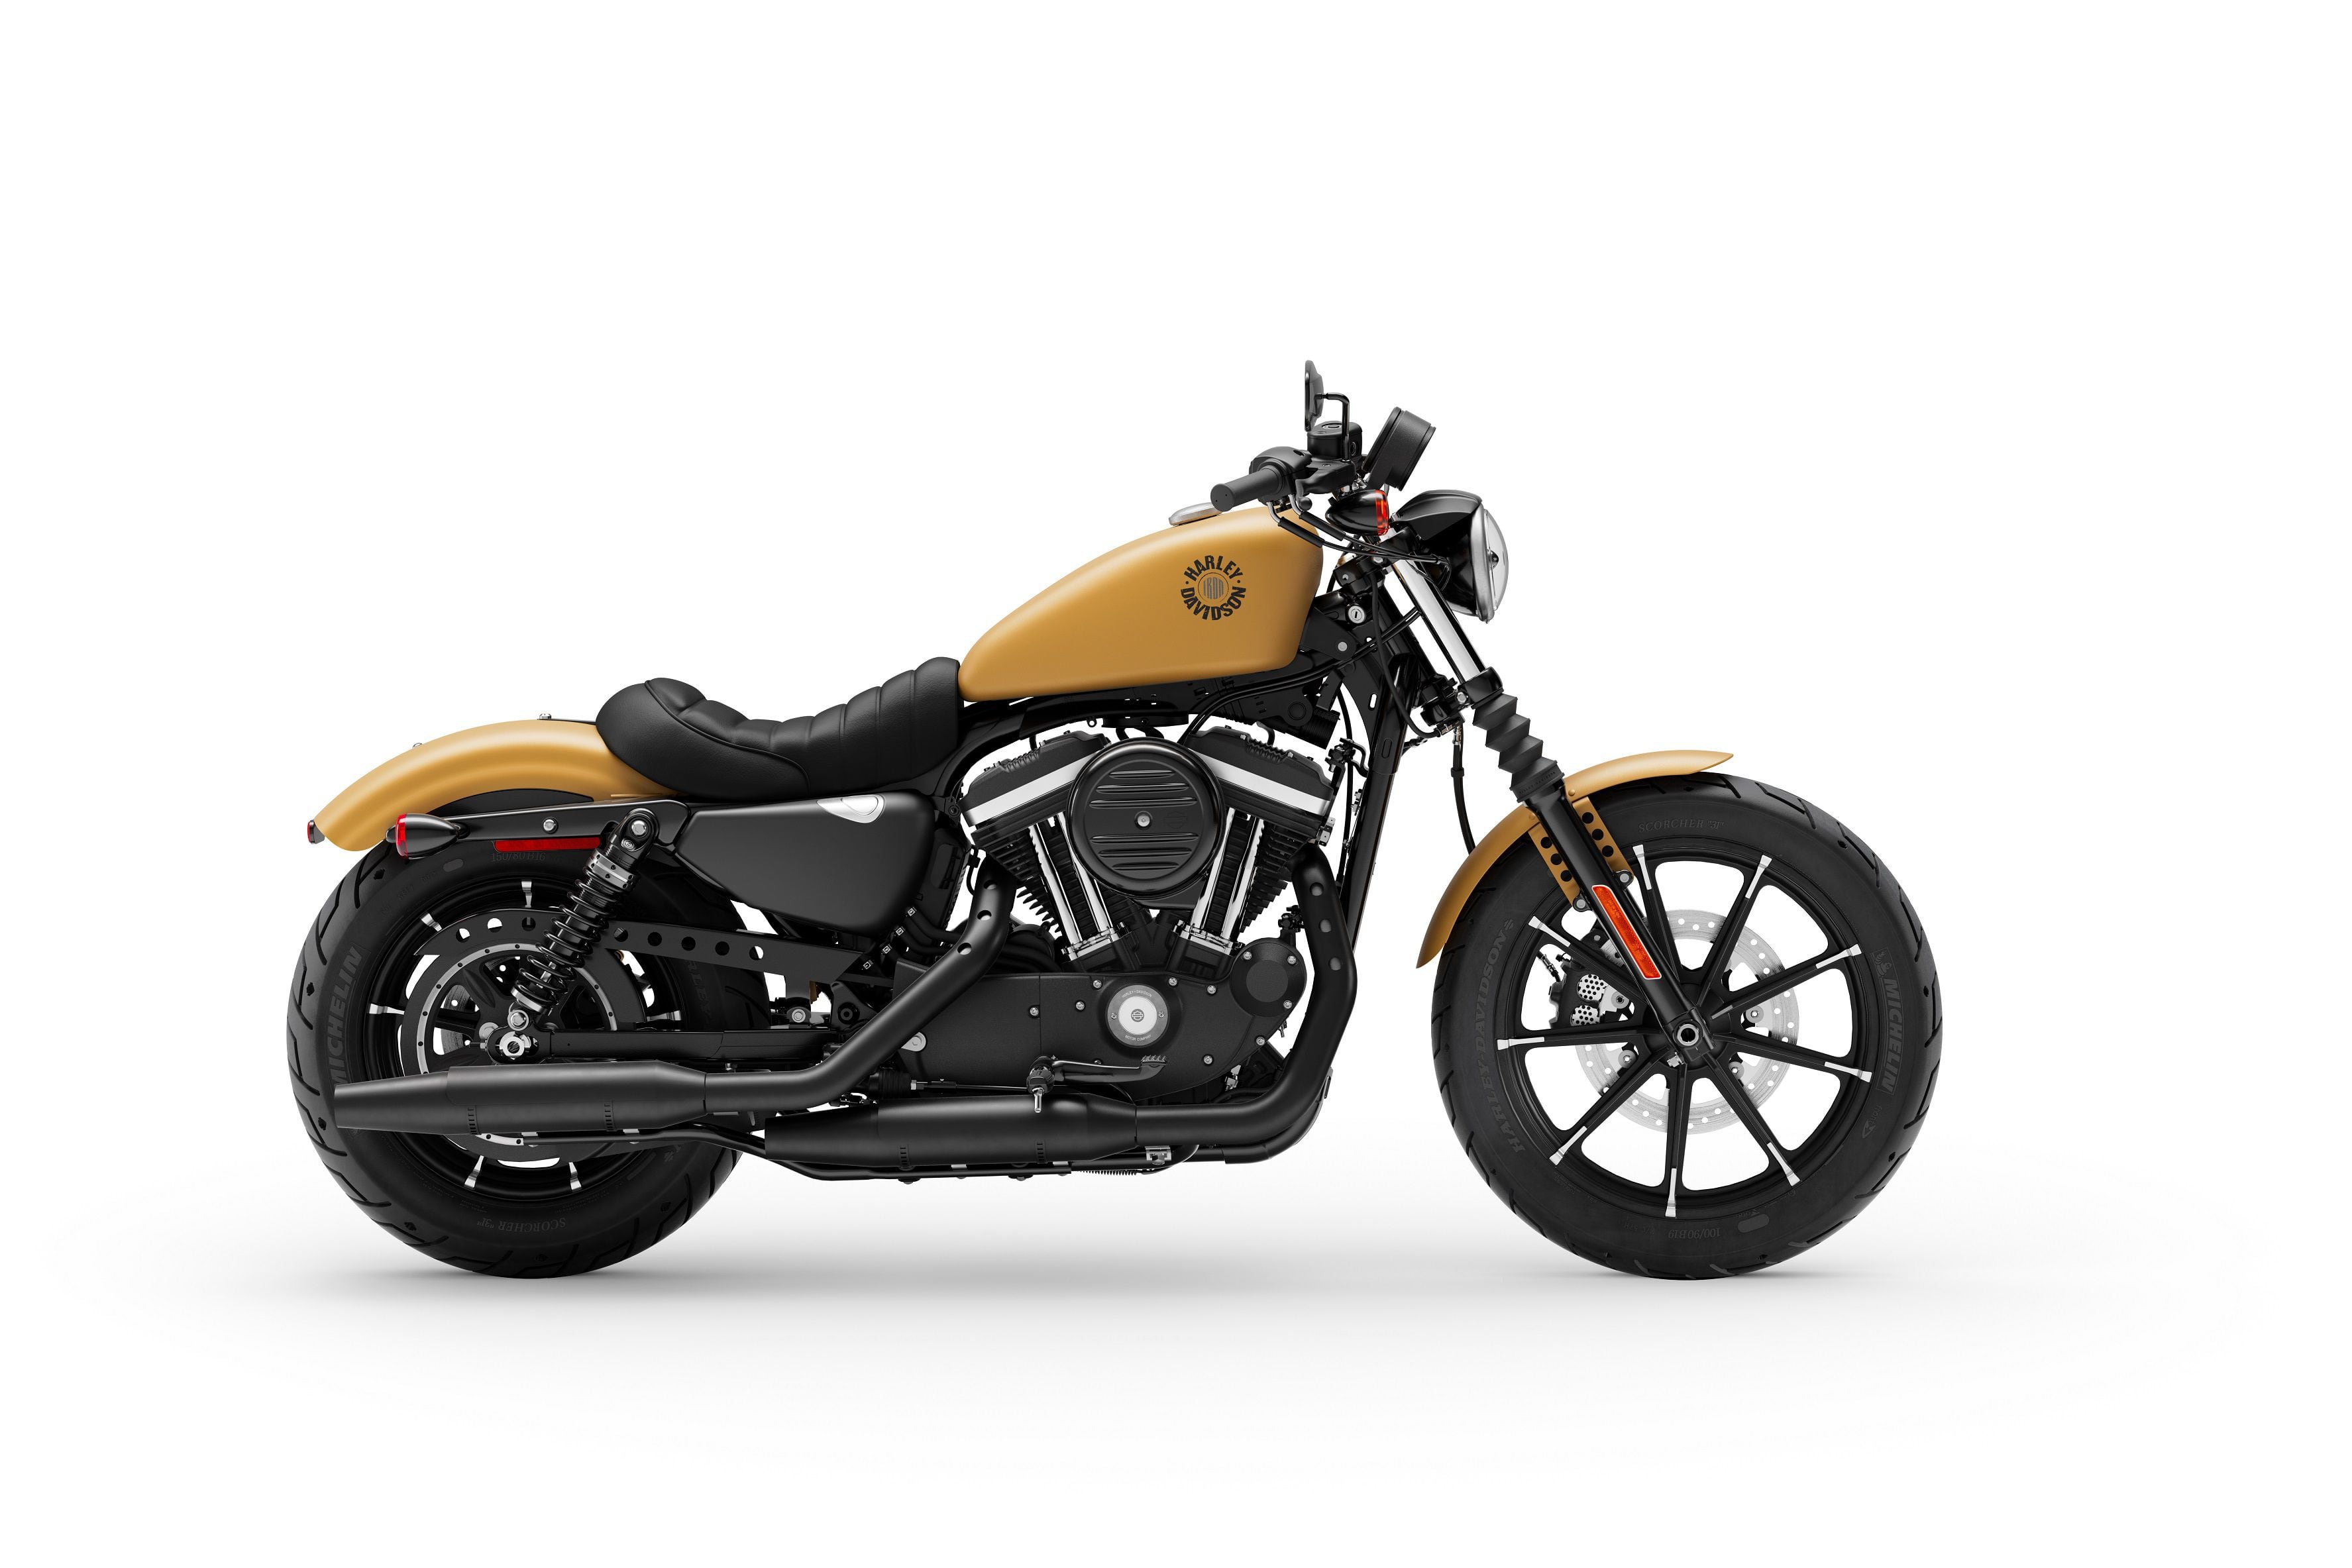 2020 Harley-Davidson Sportster Iron 883 Buyer's Guide: Specs, Photos, Price